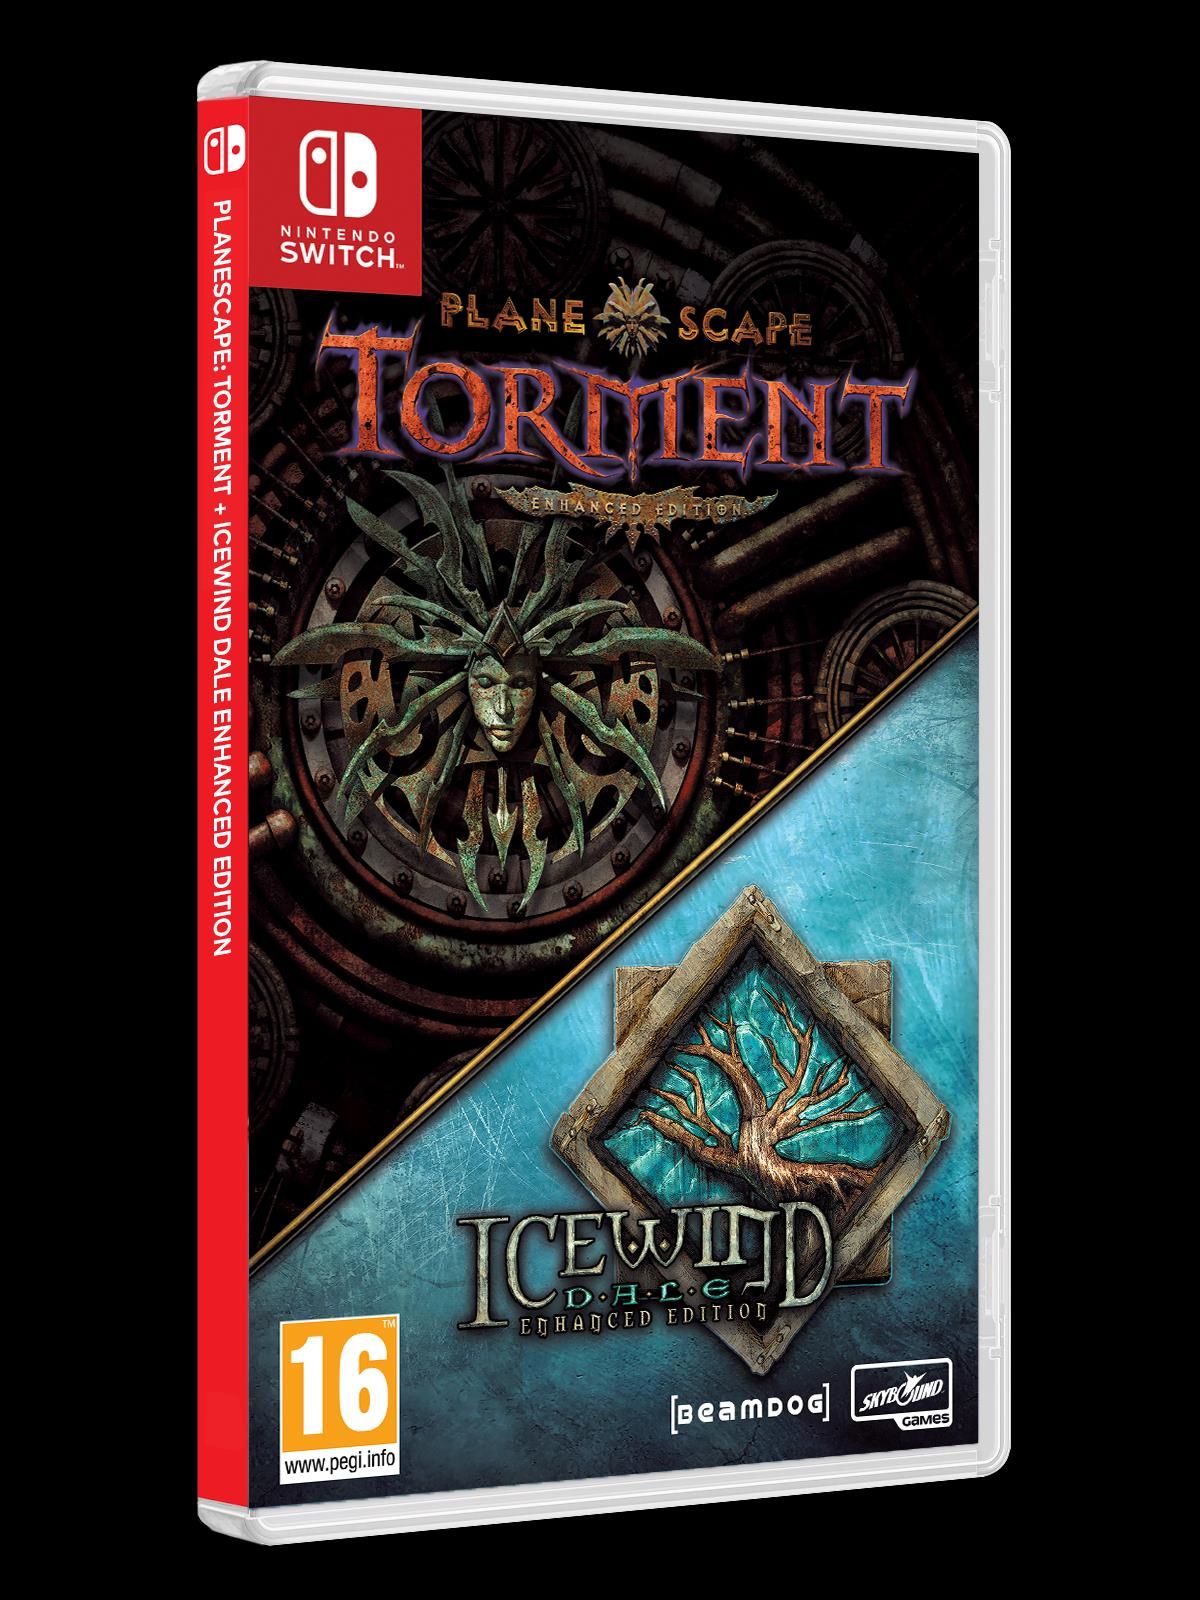 Icewind Dale + PlaneScape Torment Enhanced Editions